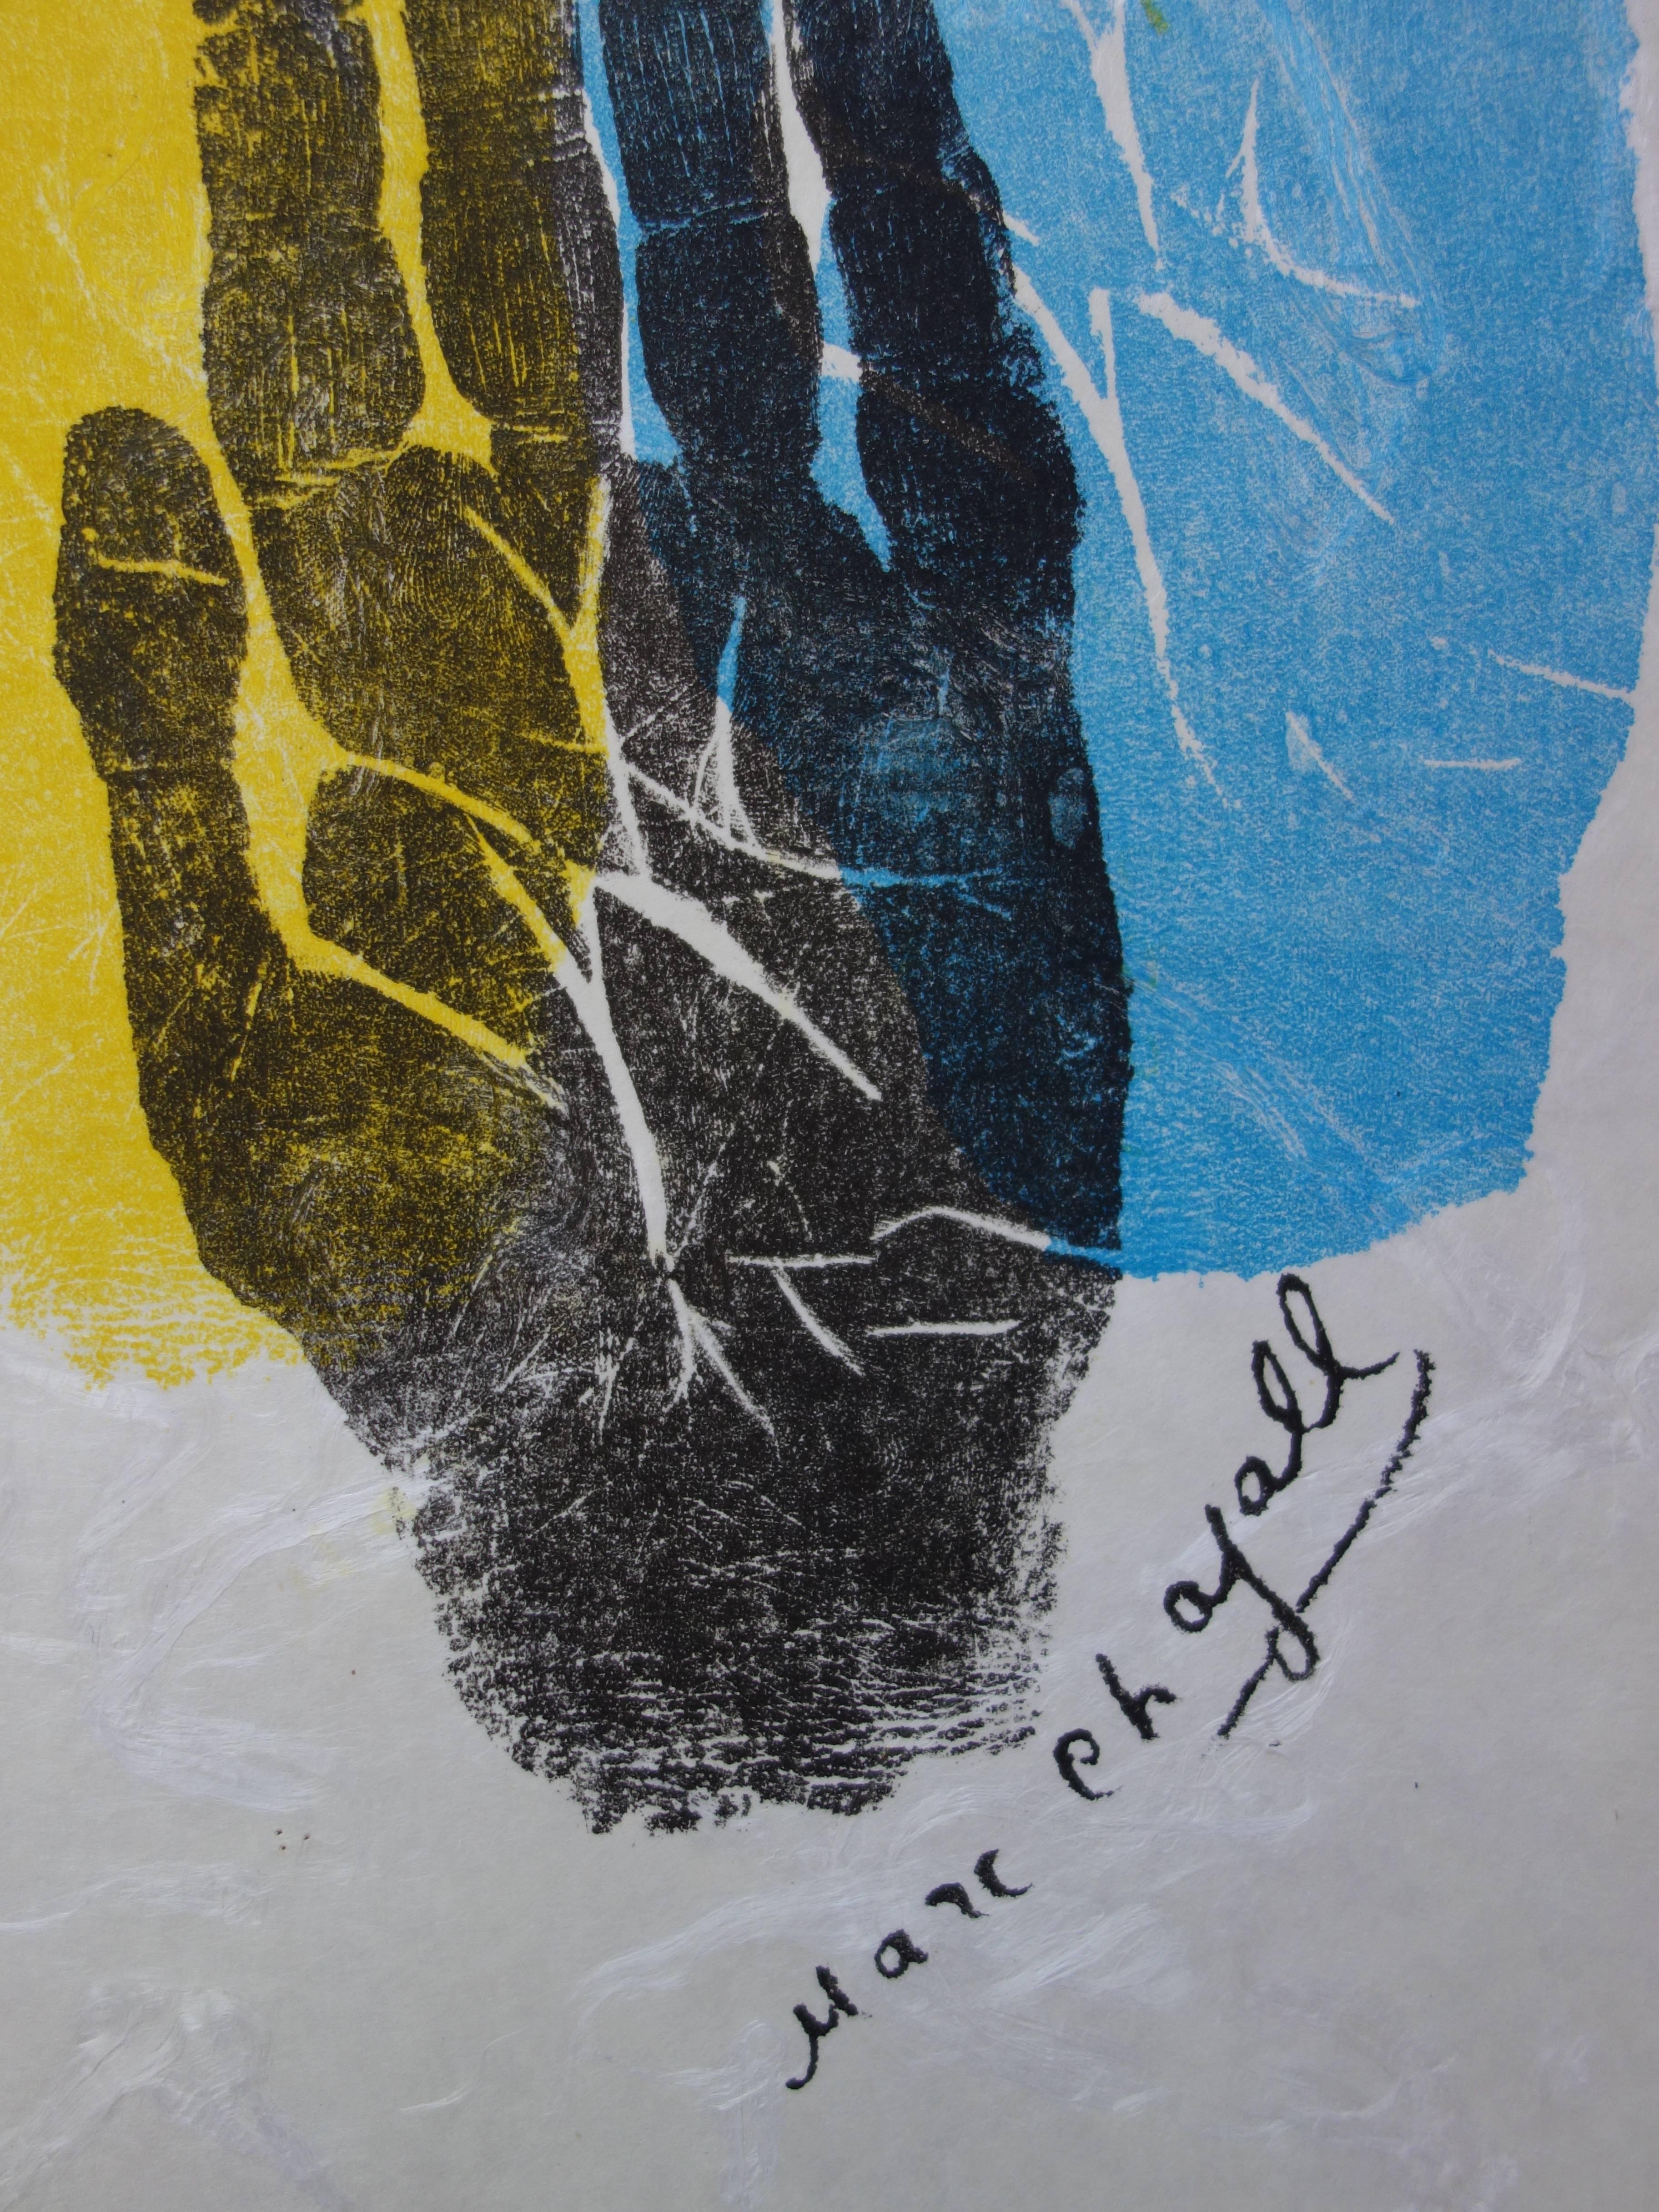 Hand of the Artist - Original lithograph - 1962 - Realist Print by Marc Chagall